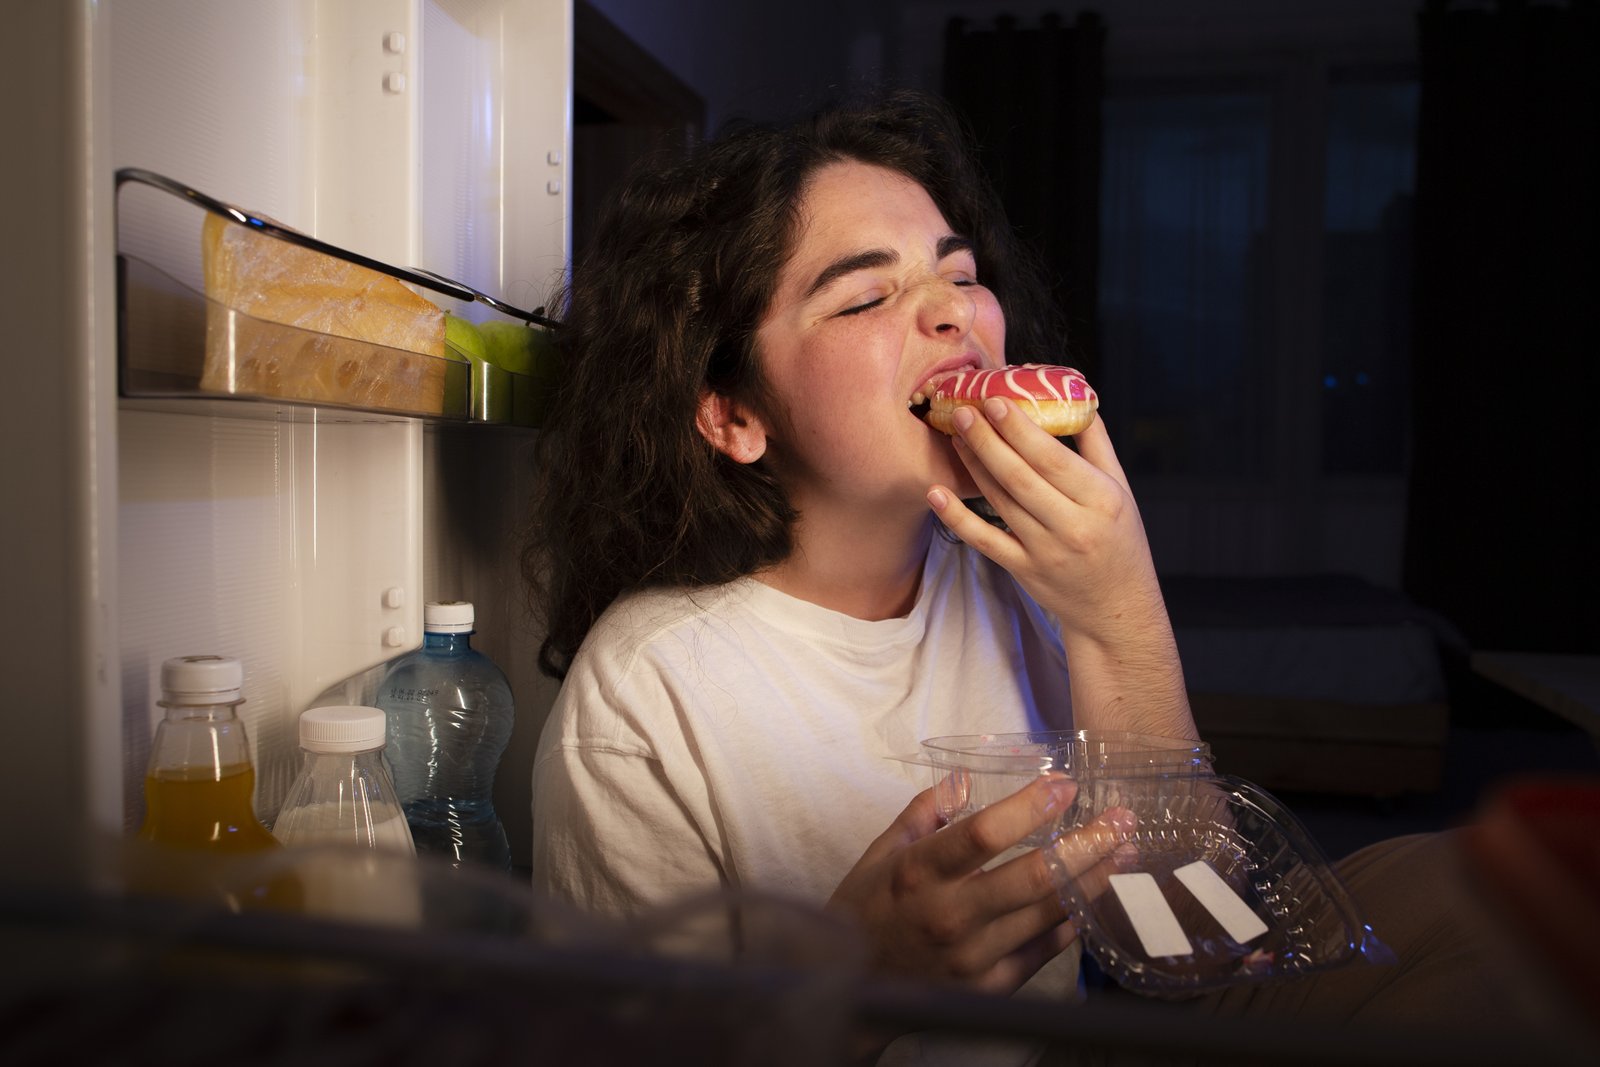 Turning To Junk Food During Stress? Study Says It Increases Anxiety